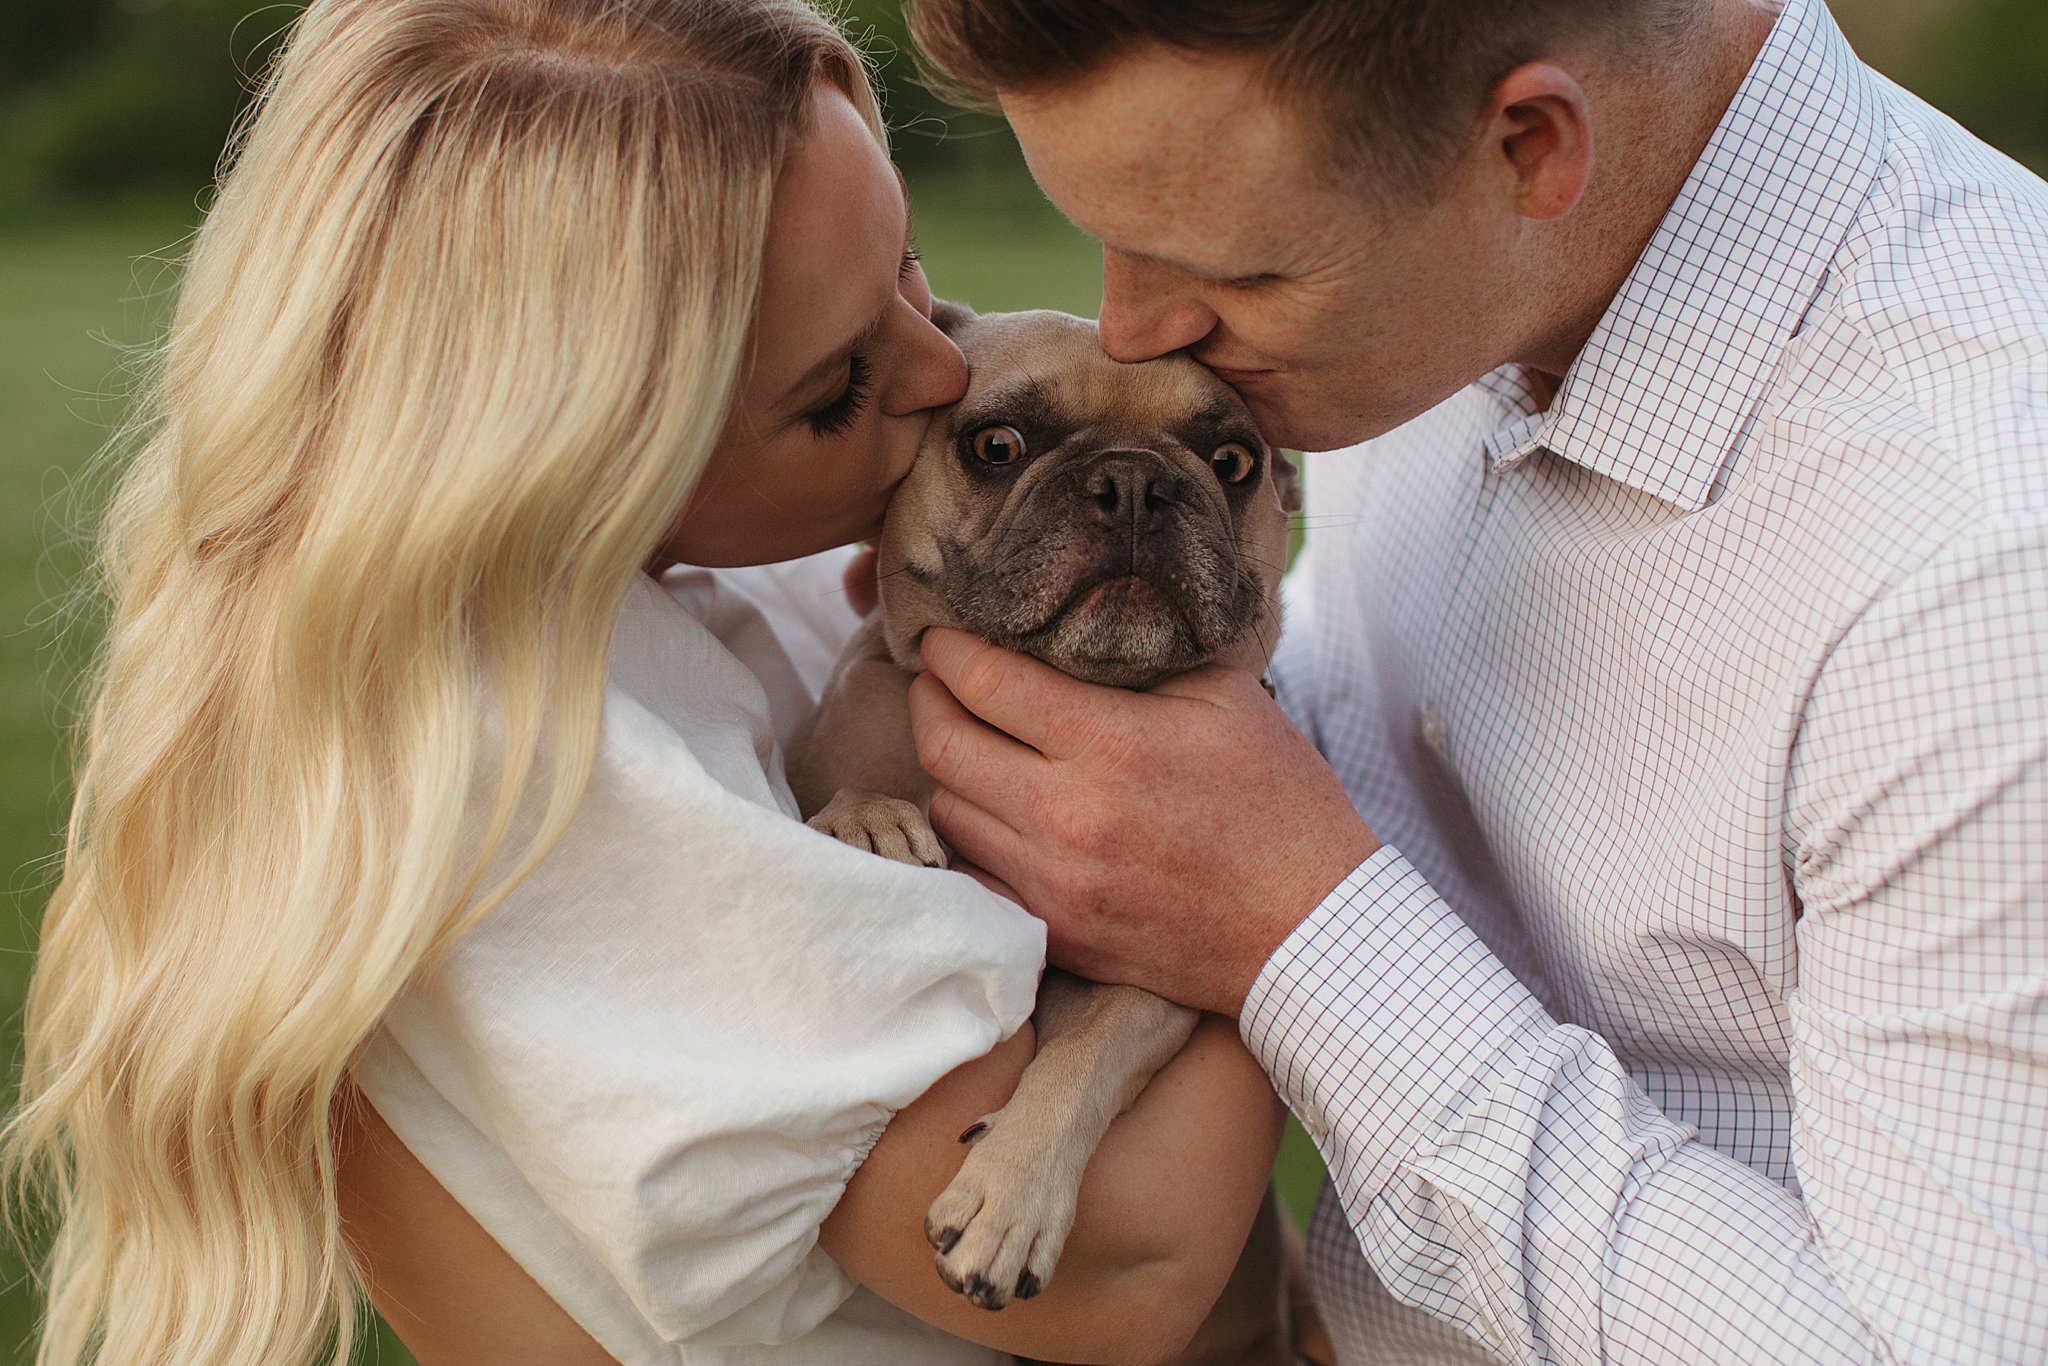 How to Include your Dog in your Engagement Photos